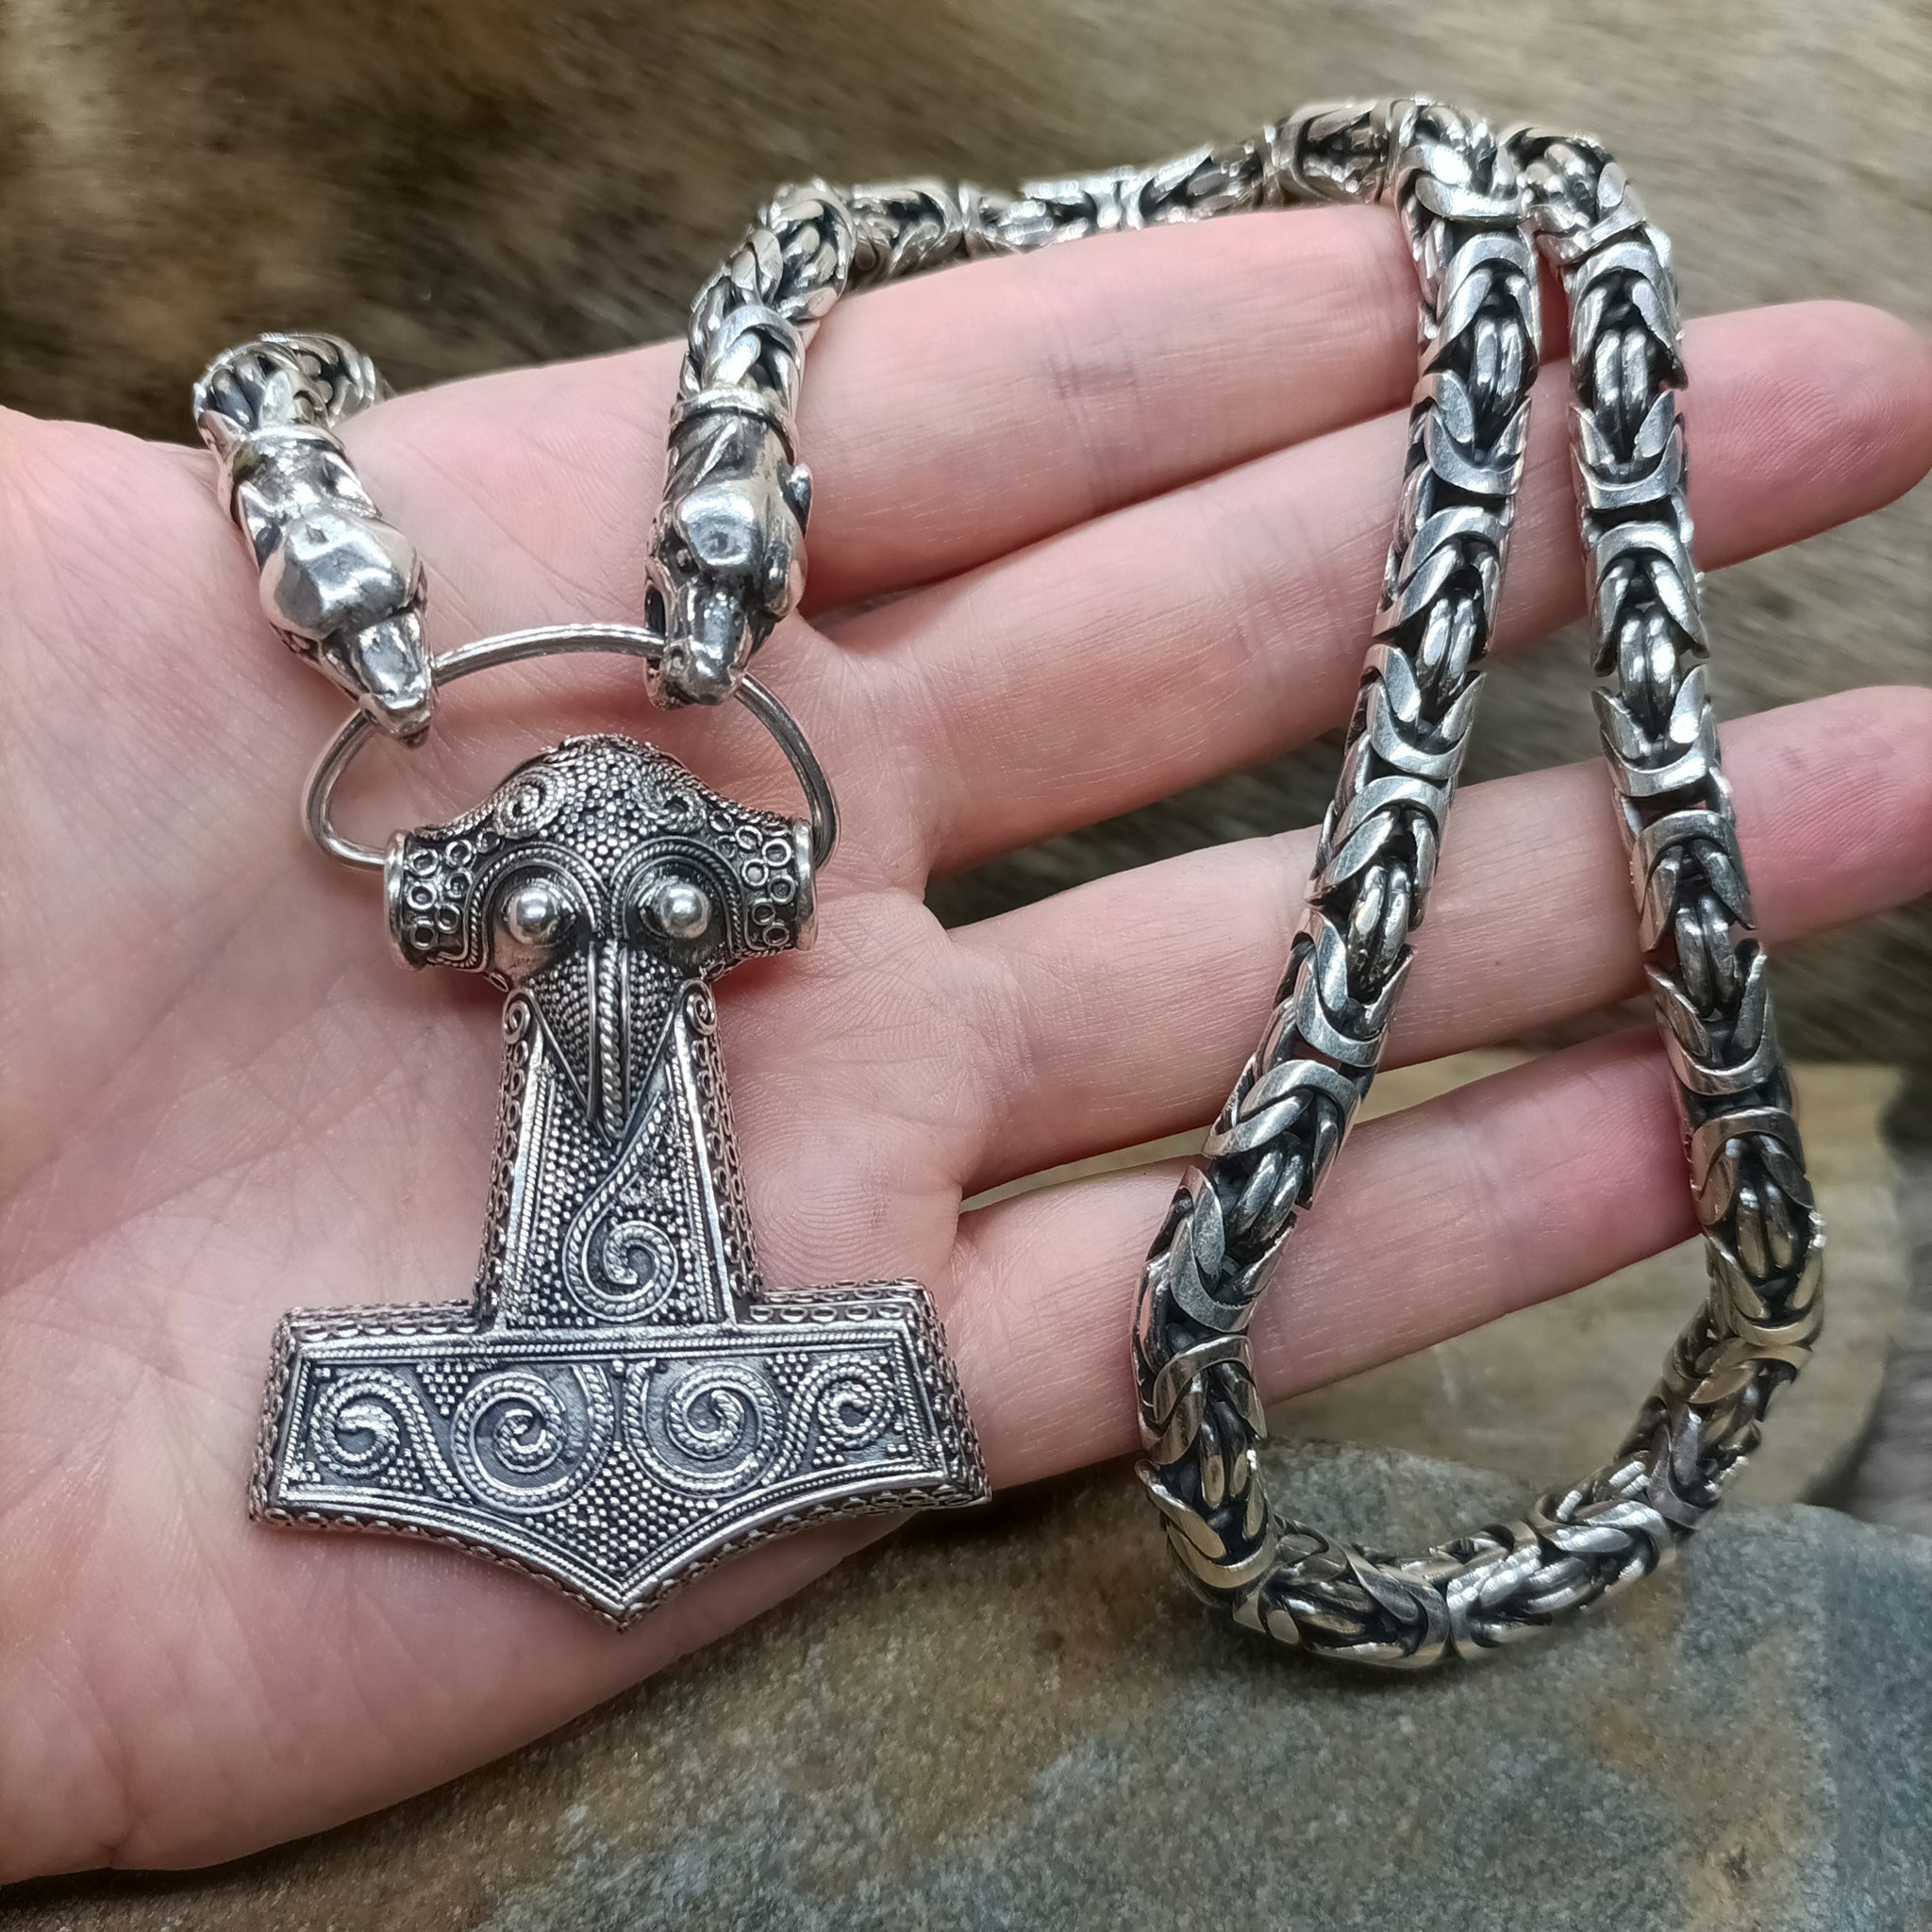 8mm Thick Silver King Chain Thors Hammer Necklace with Ferocious Wolf Heads and Large Silver Kabara Thors Hammer on Hand